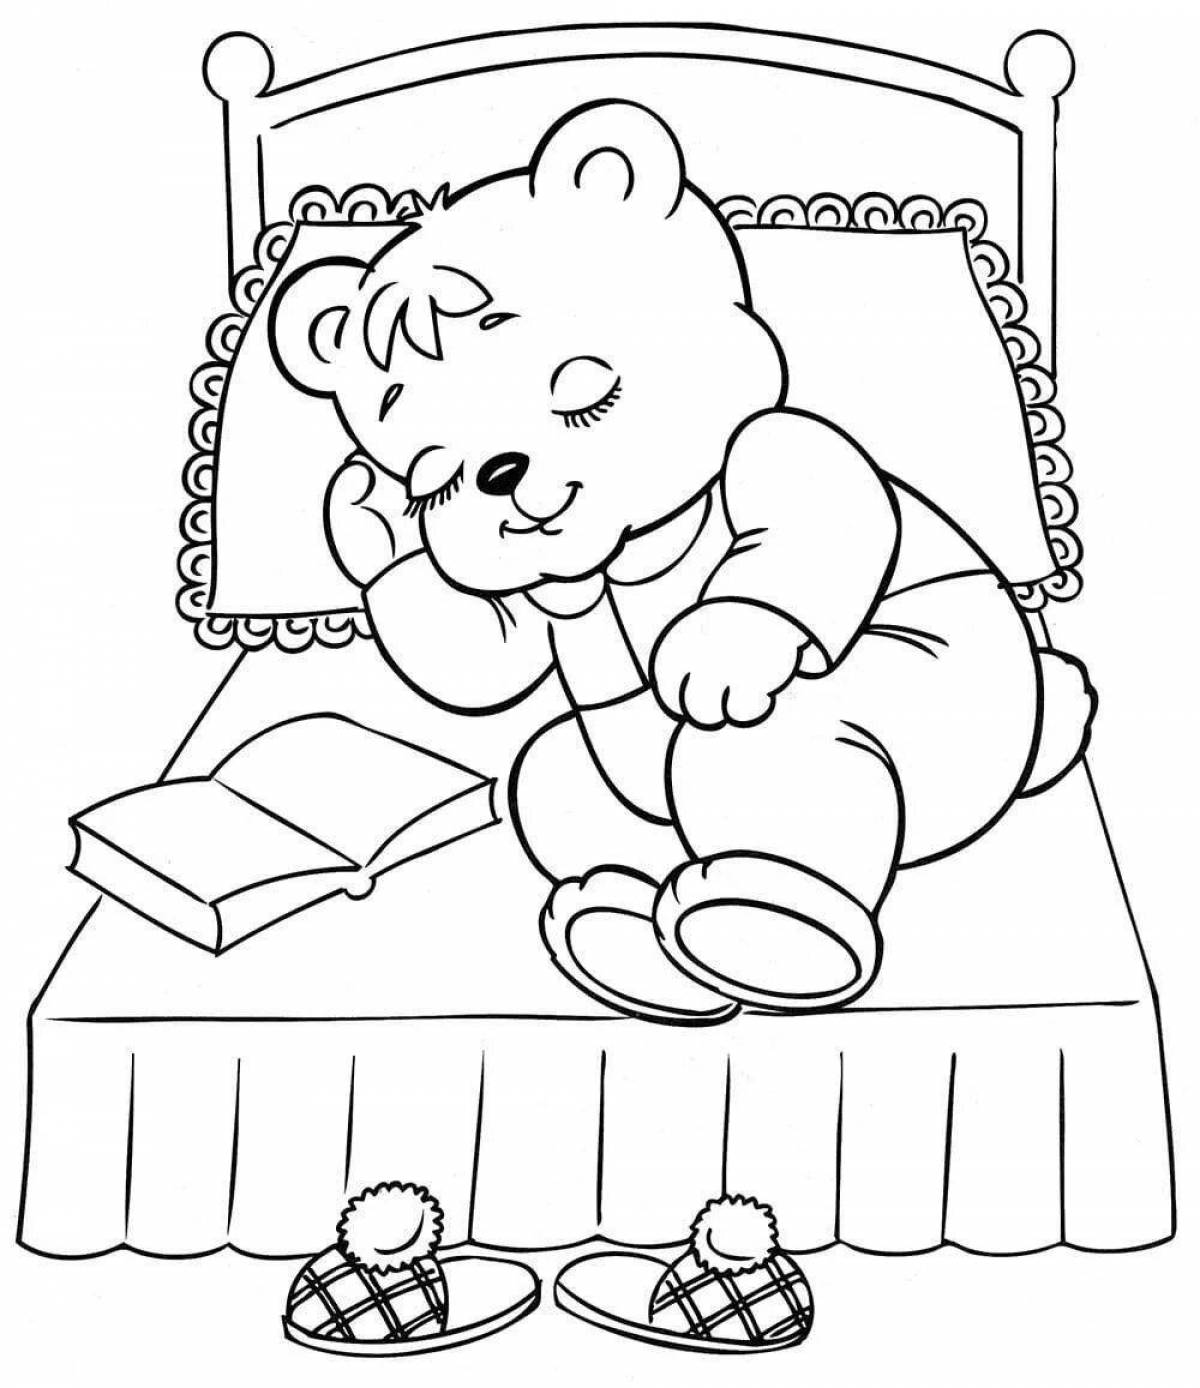 Fun coloring bear for children 5-6 years old